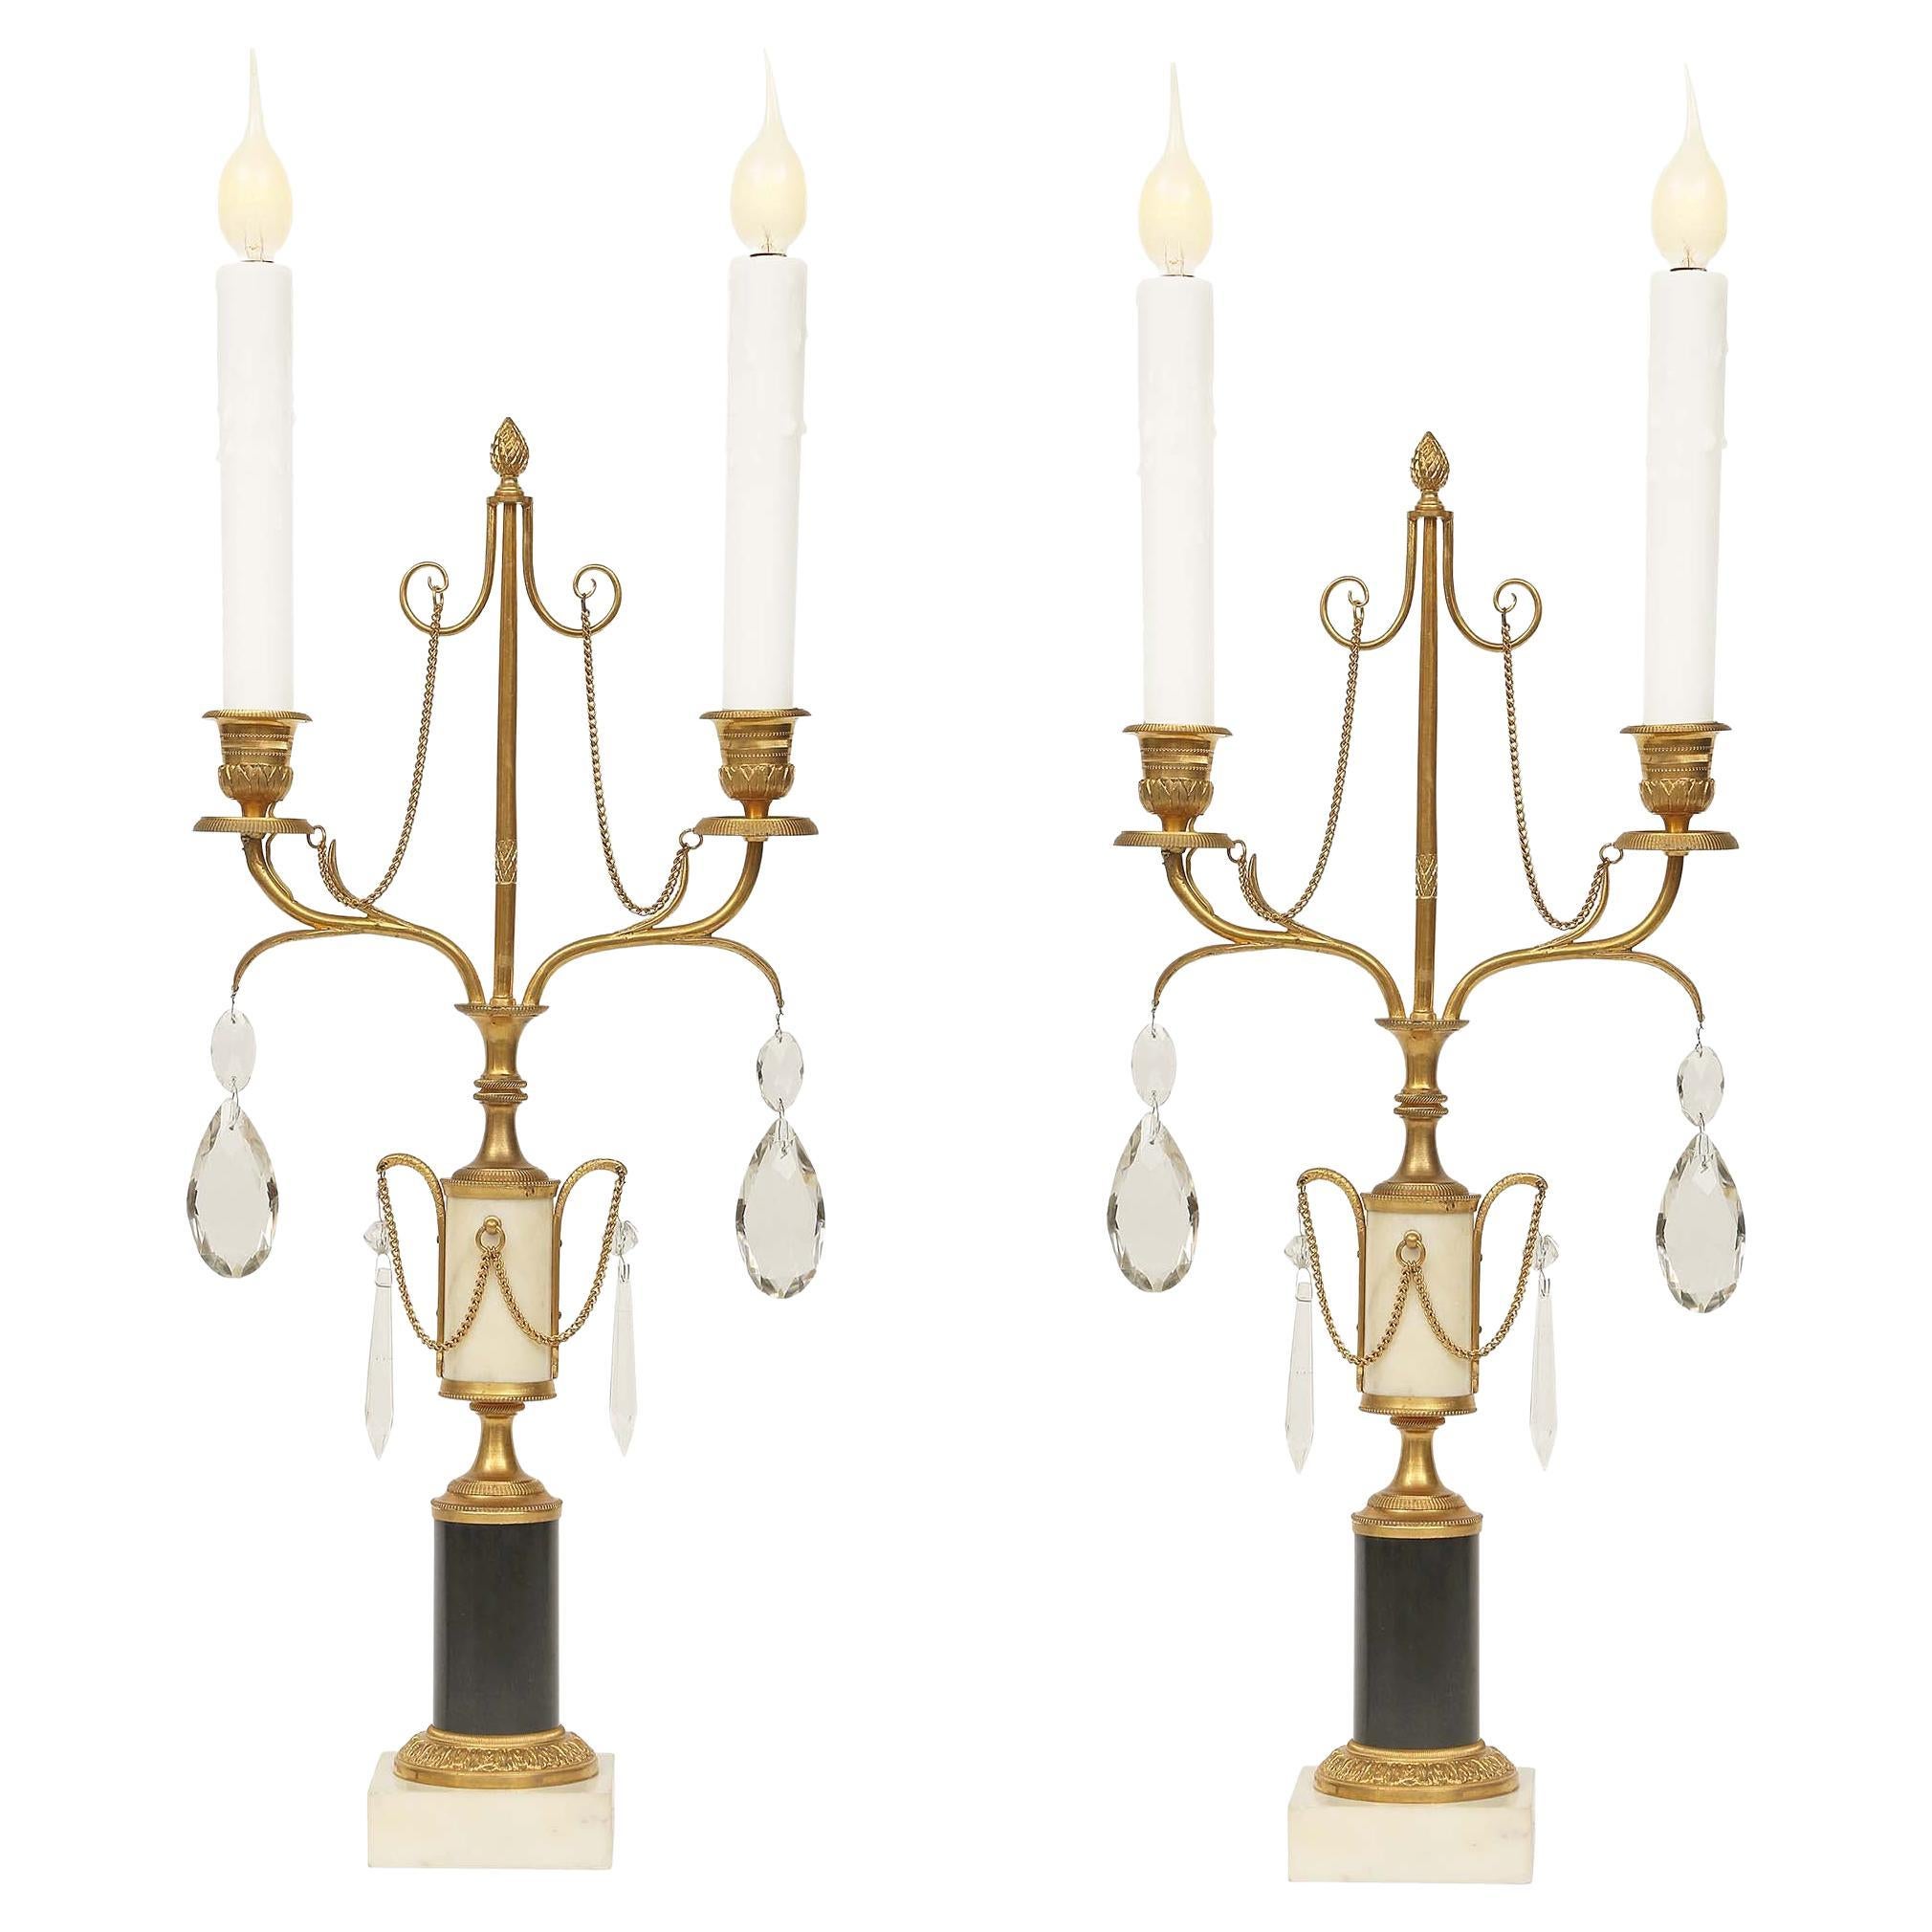 Pair of French Early 19th Century Louis XVI St Candelabras For Sale